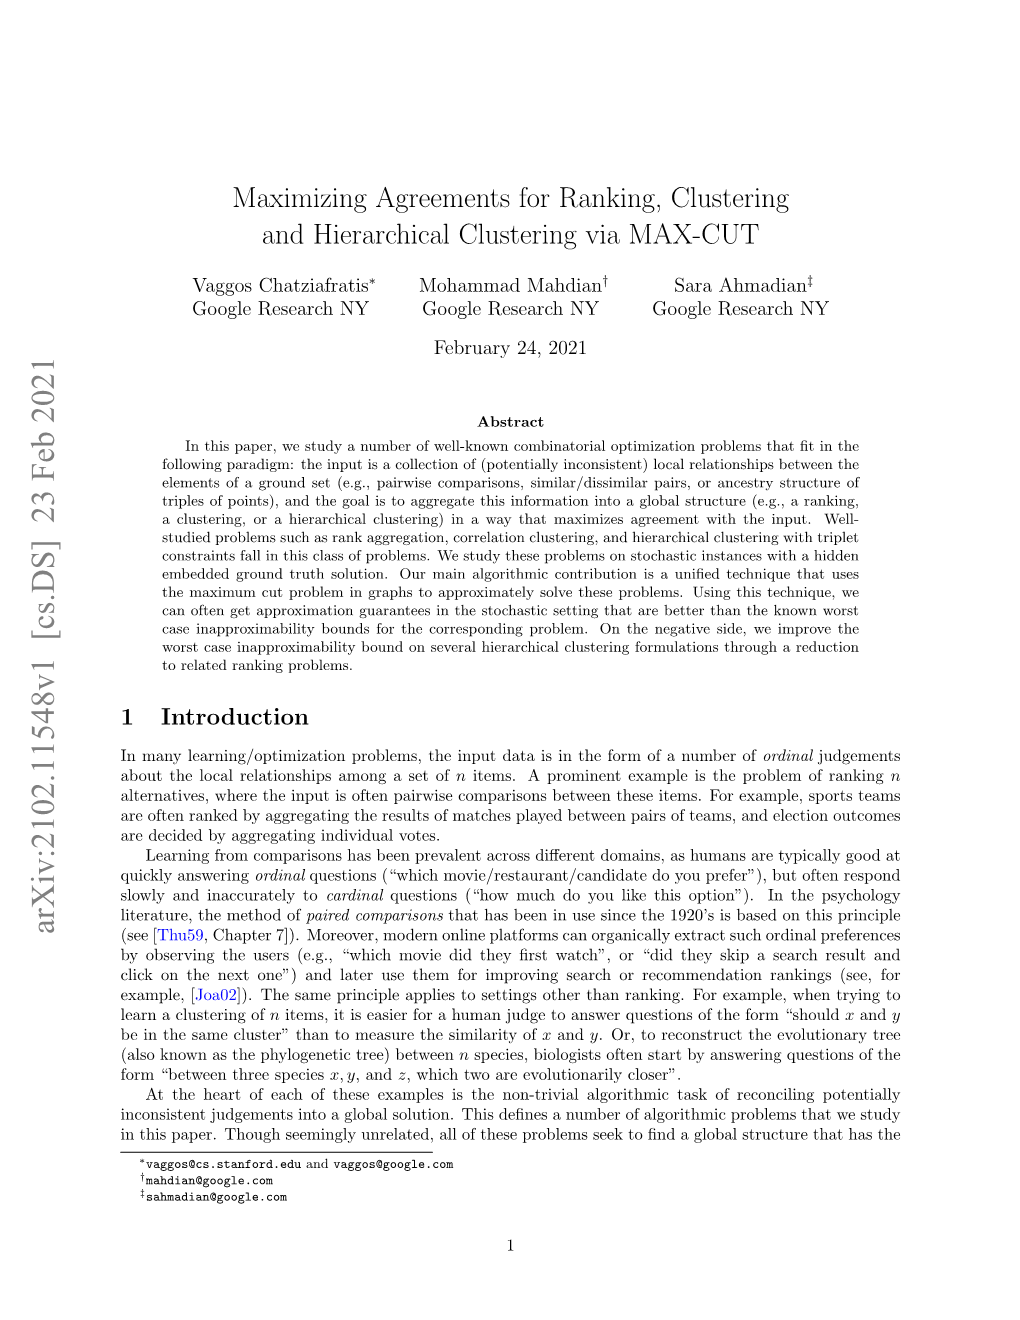 Maximizing Agreements for Ranking, Clustering and Hierarchical Clustering Via MAX-CUT